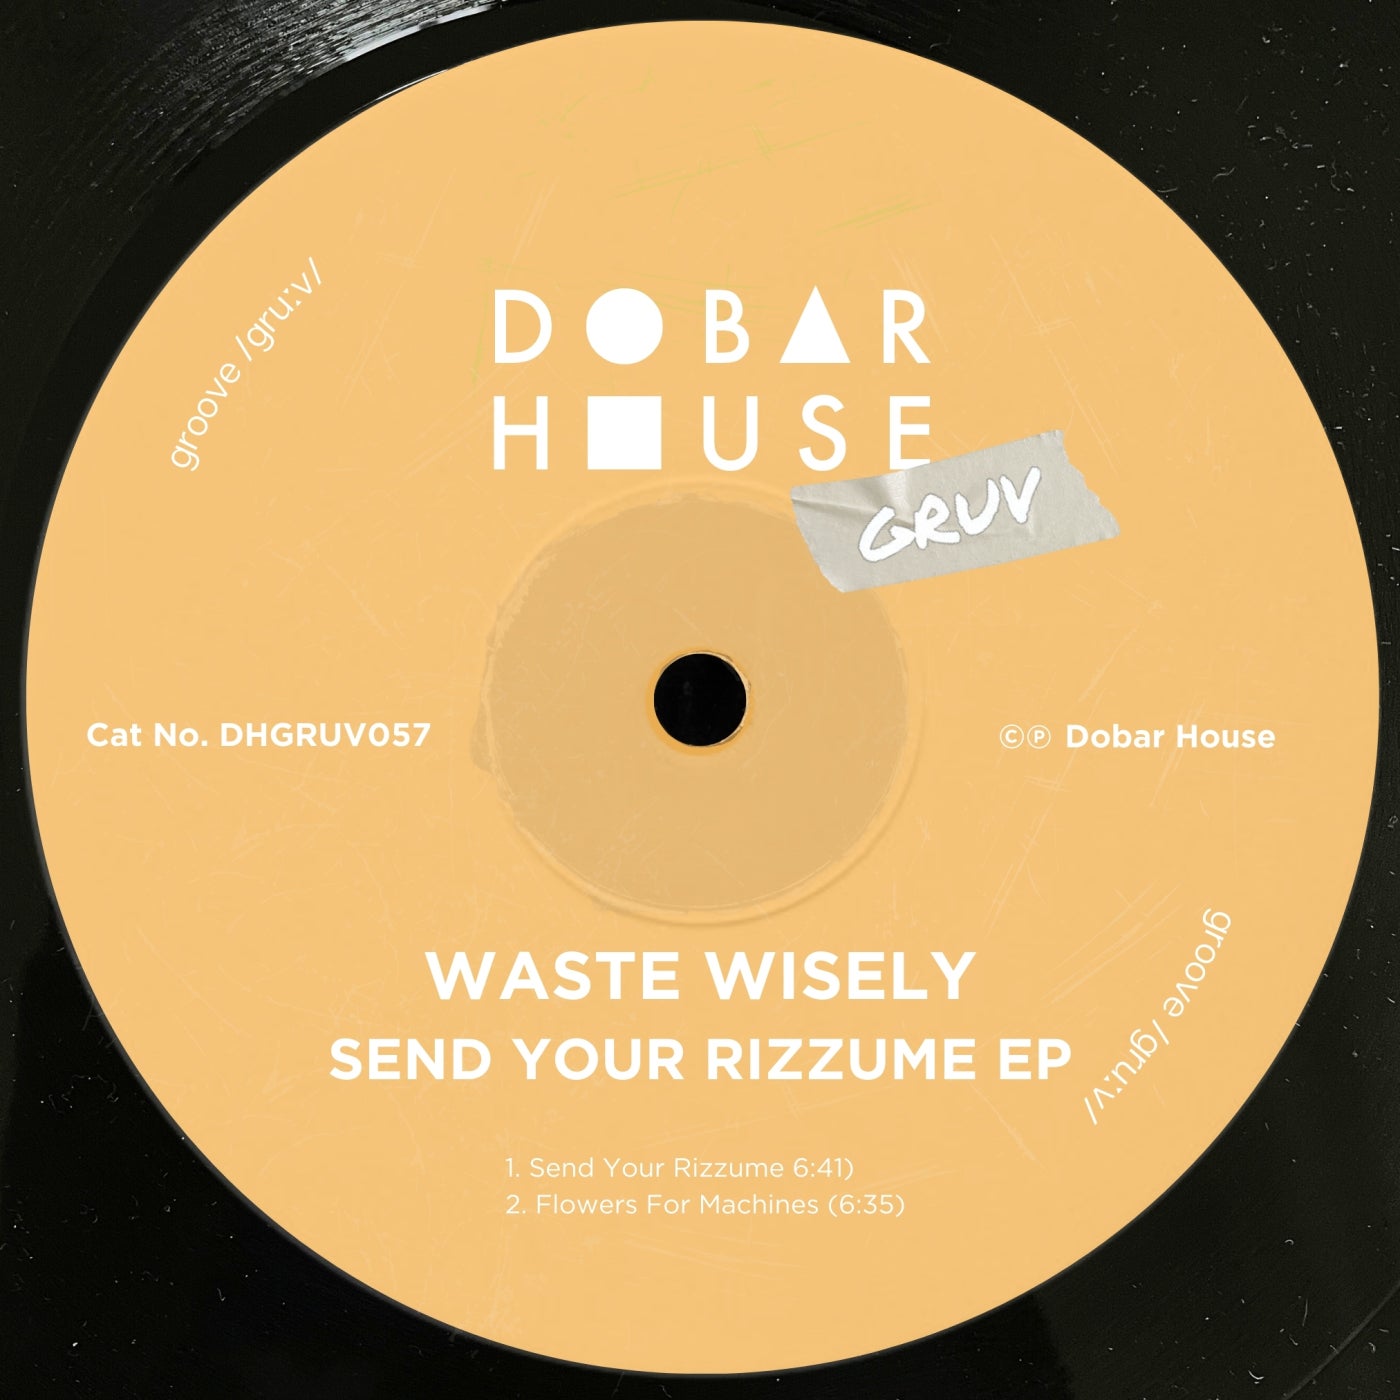 Send Your Rizzume EP